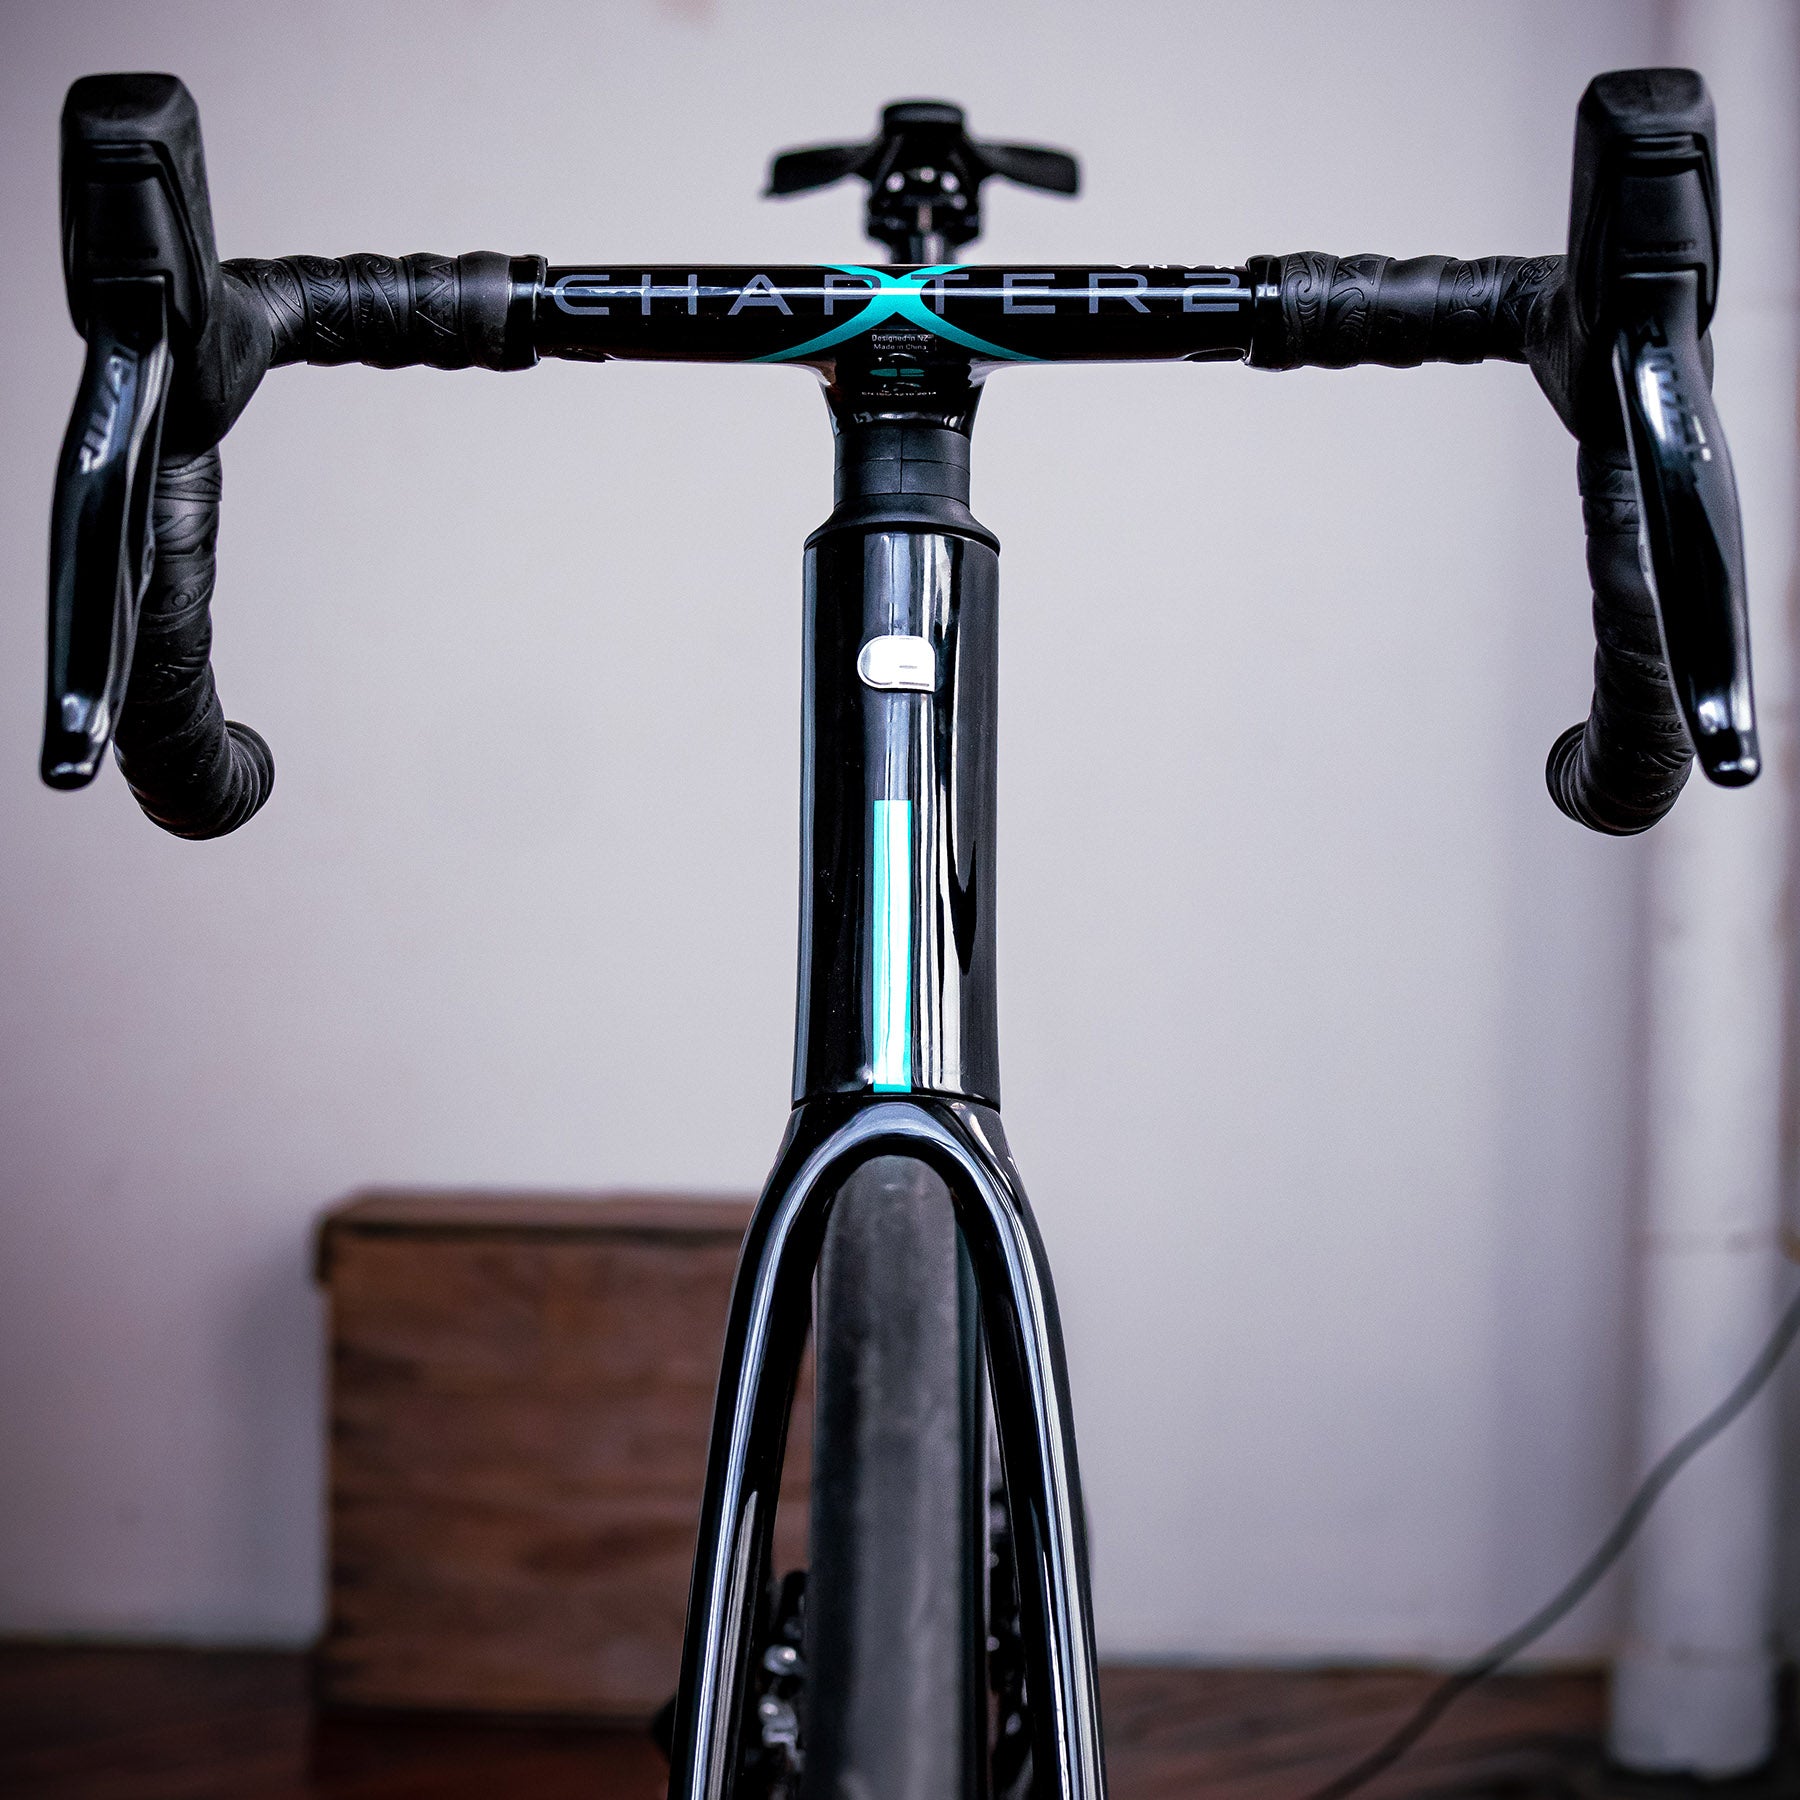 Image features a front facing shot of the handle bars and frame on the Chapter 2 TOA bike